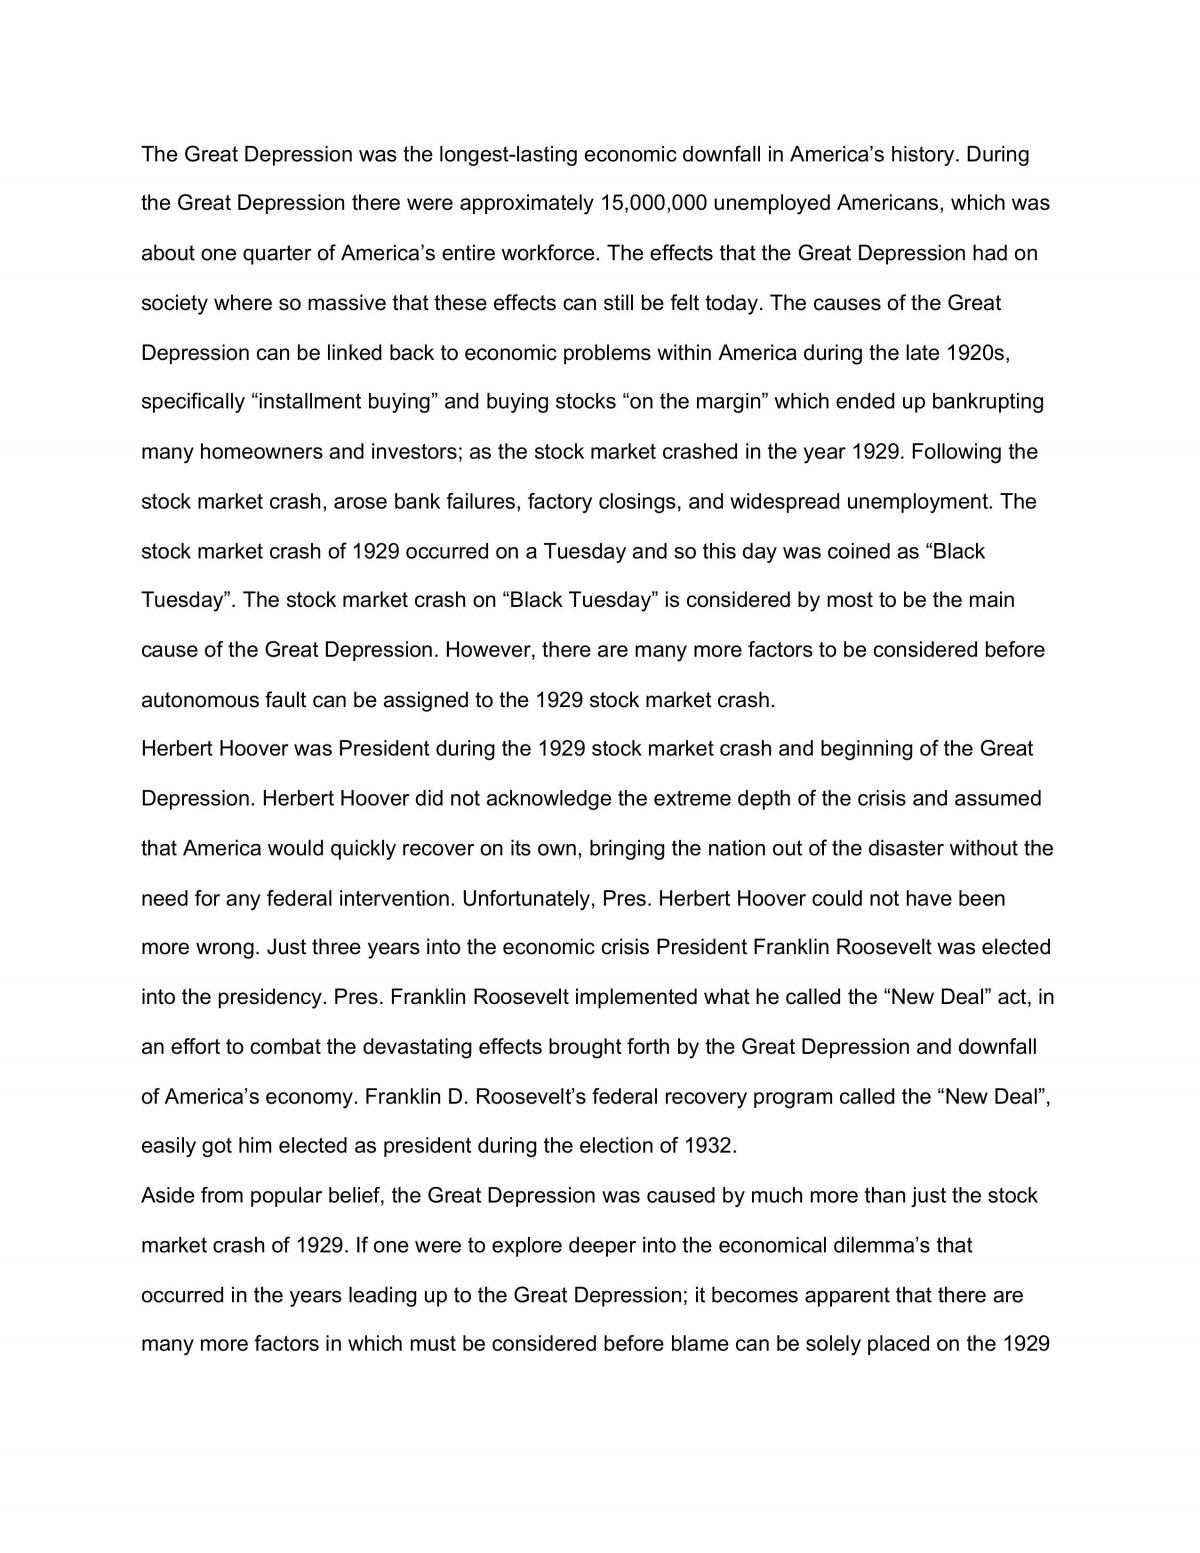 The Great Depression and its long lasting effects - Page 1